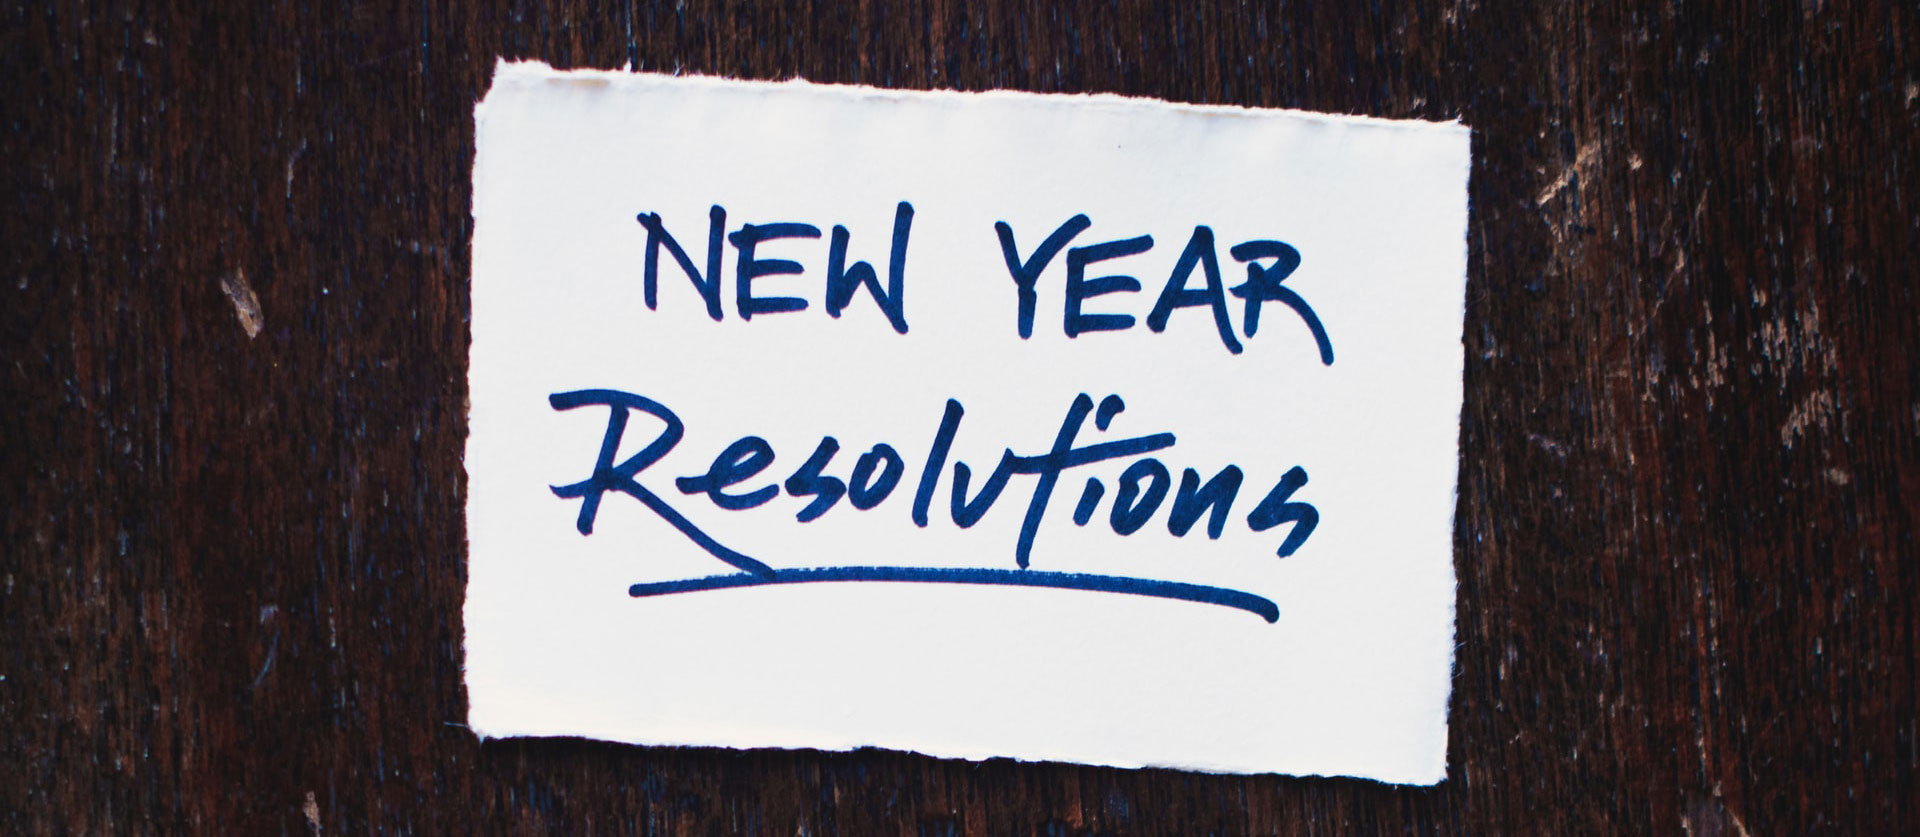 3 Common Achievable New Year's Resolutions of College Students